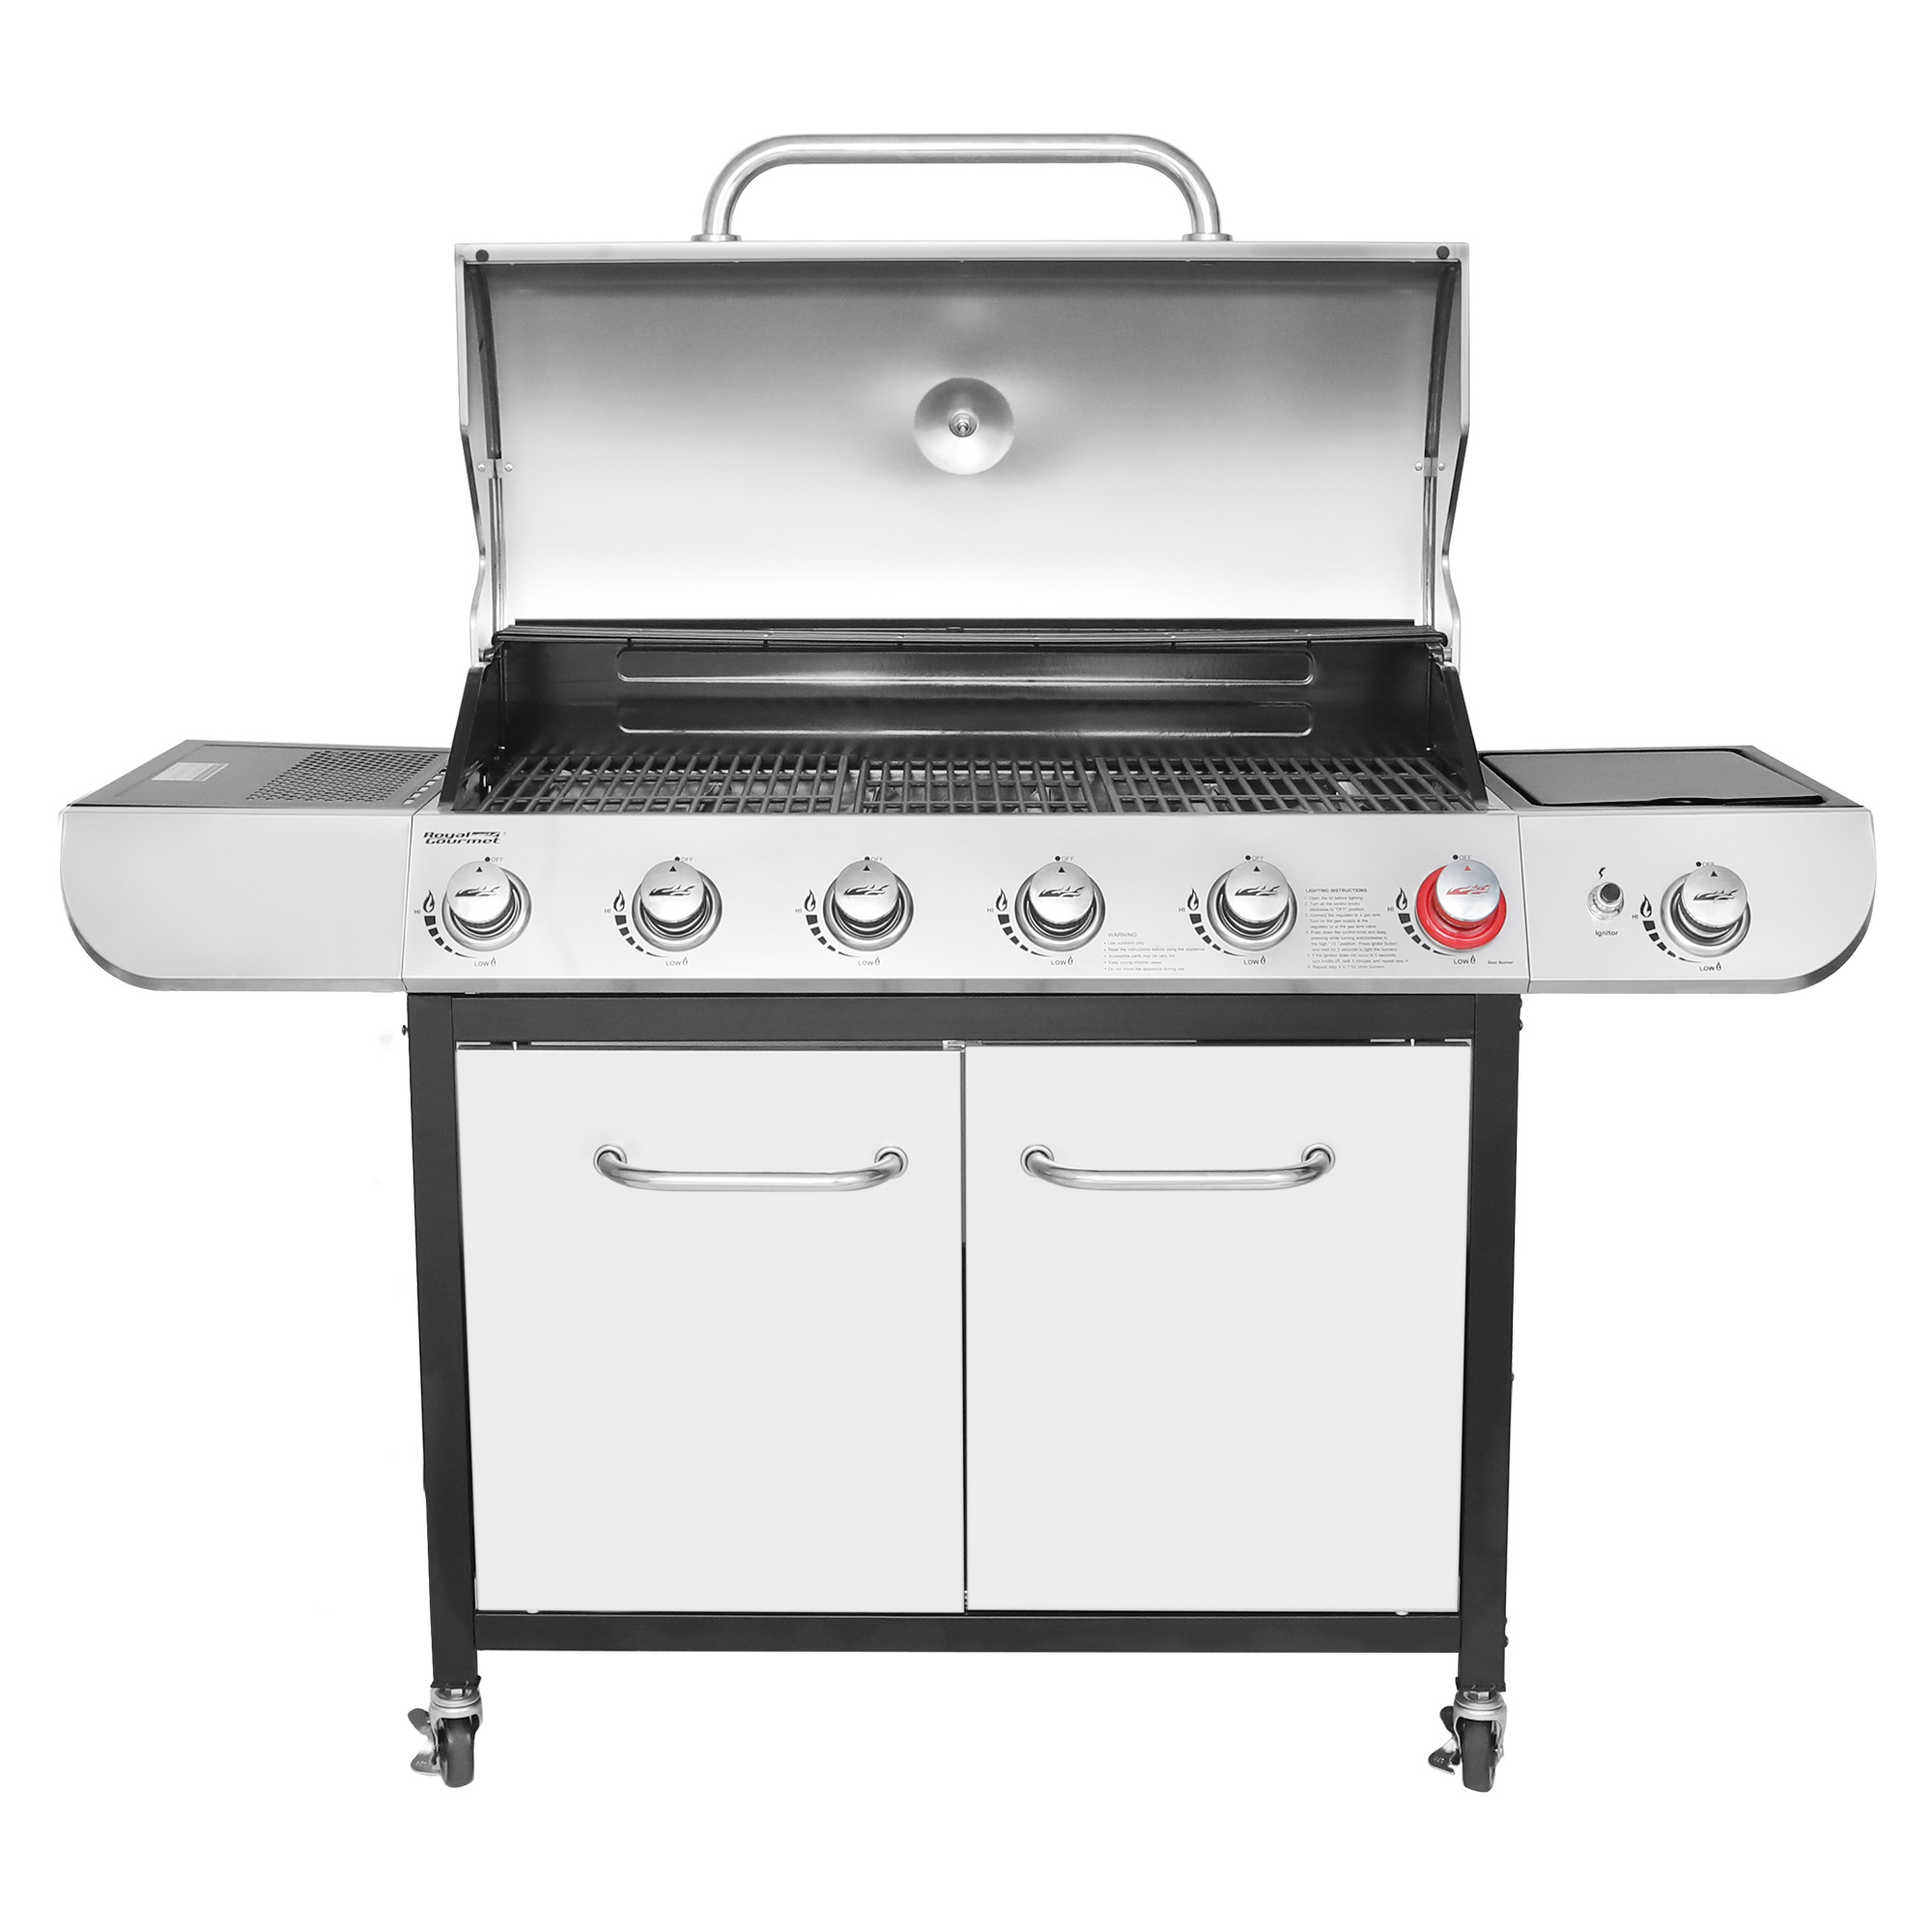 Royal Gourmet SG6002 Classic 6-Burner 71000-BTU LP Gas Grill with Sear Burner and Side Burner, Stainless Steel - image 2 of 8